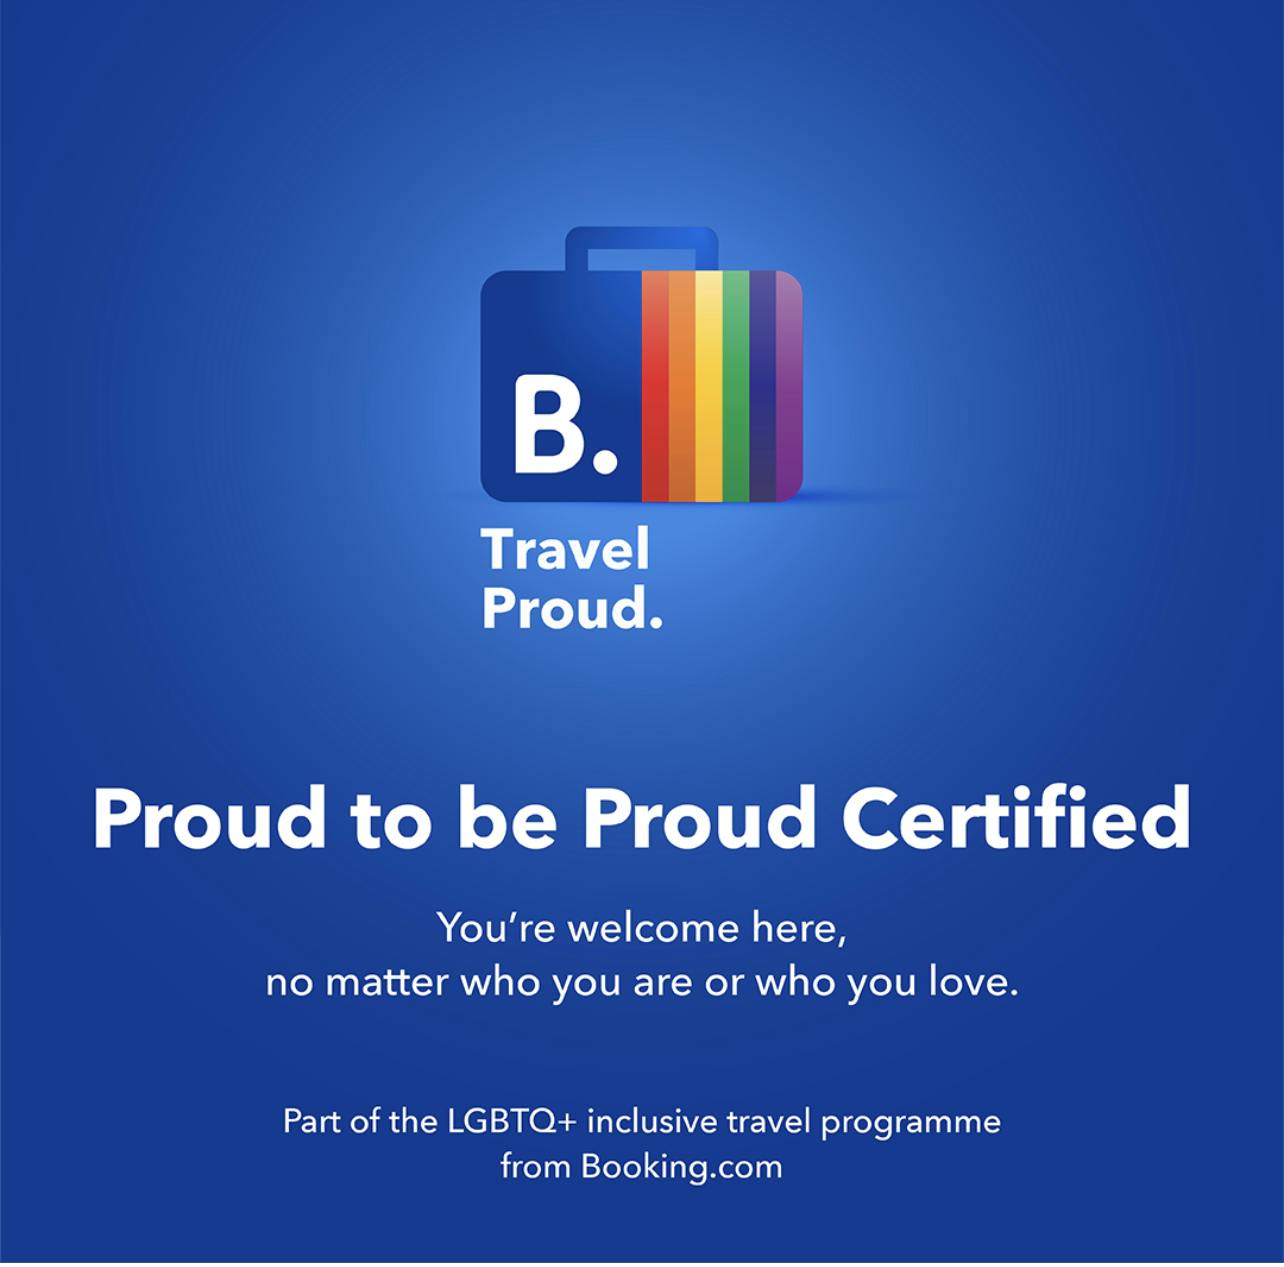 Proud Cerified we are inclusive and welcoming of all